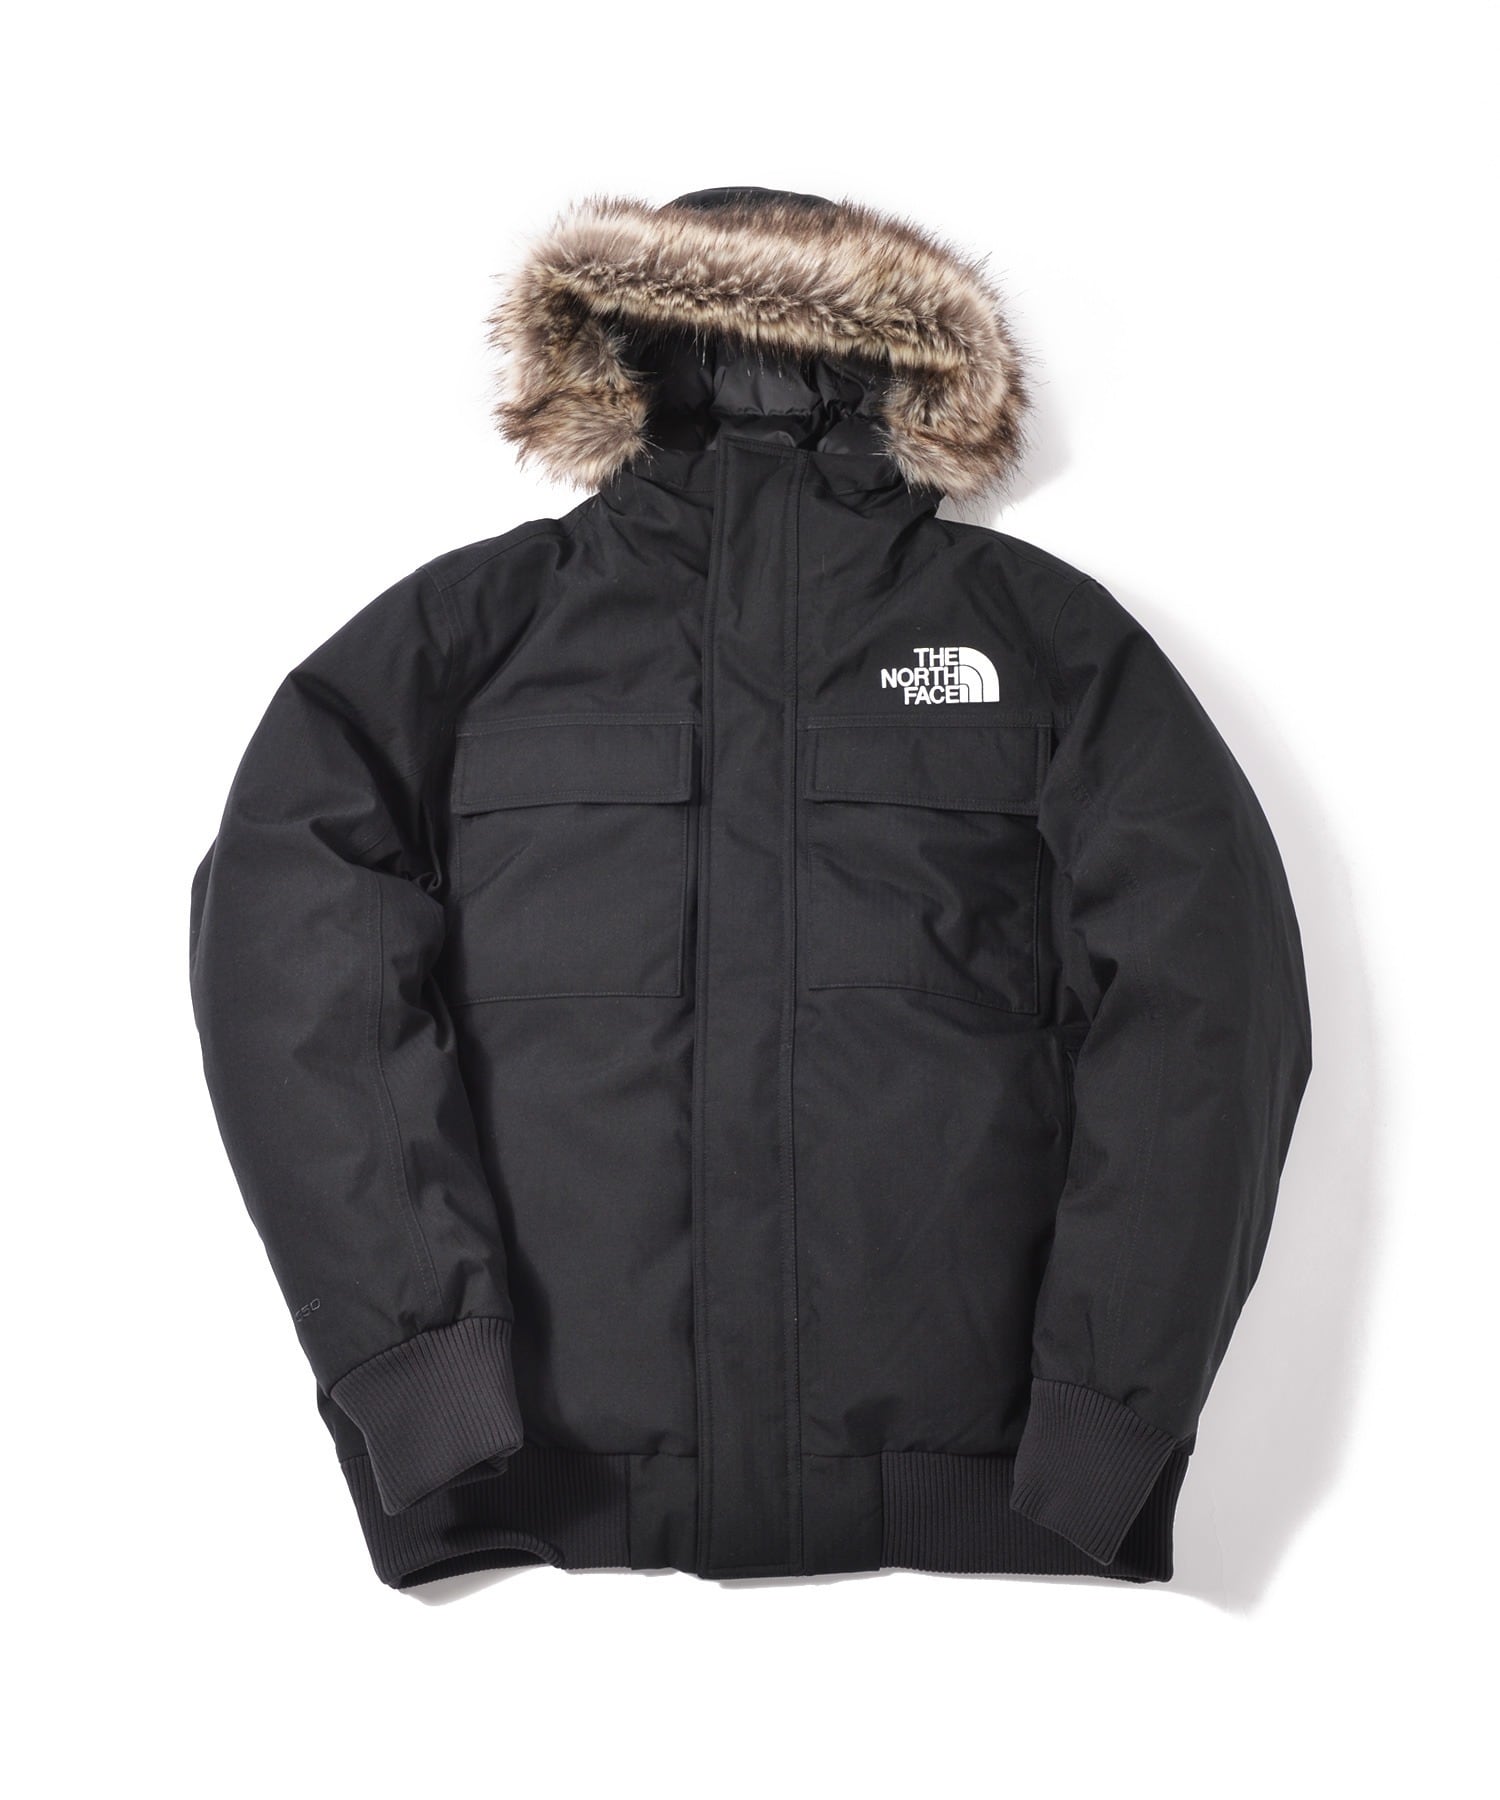 THE NORTH FACE ザノースフェイス Recycled Gotham jacket フーディー